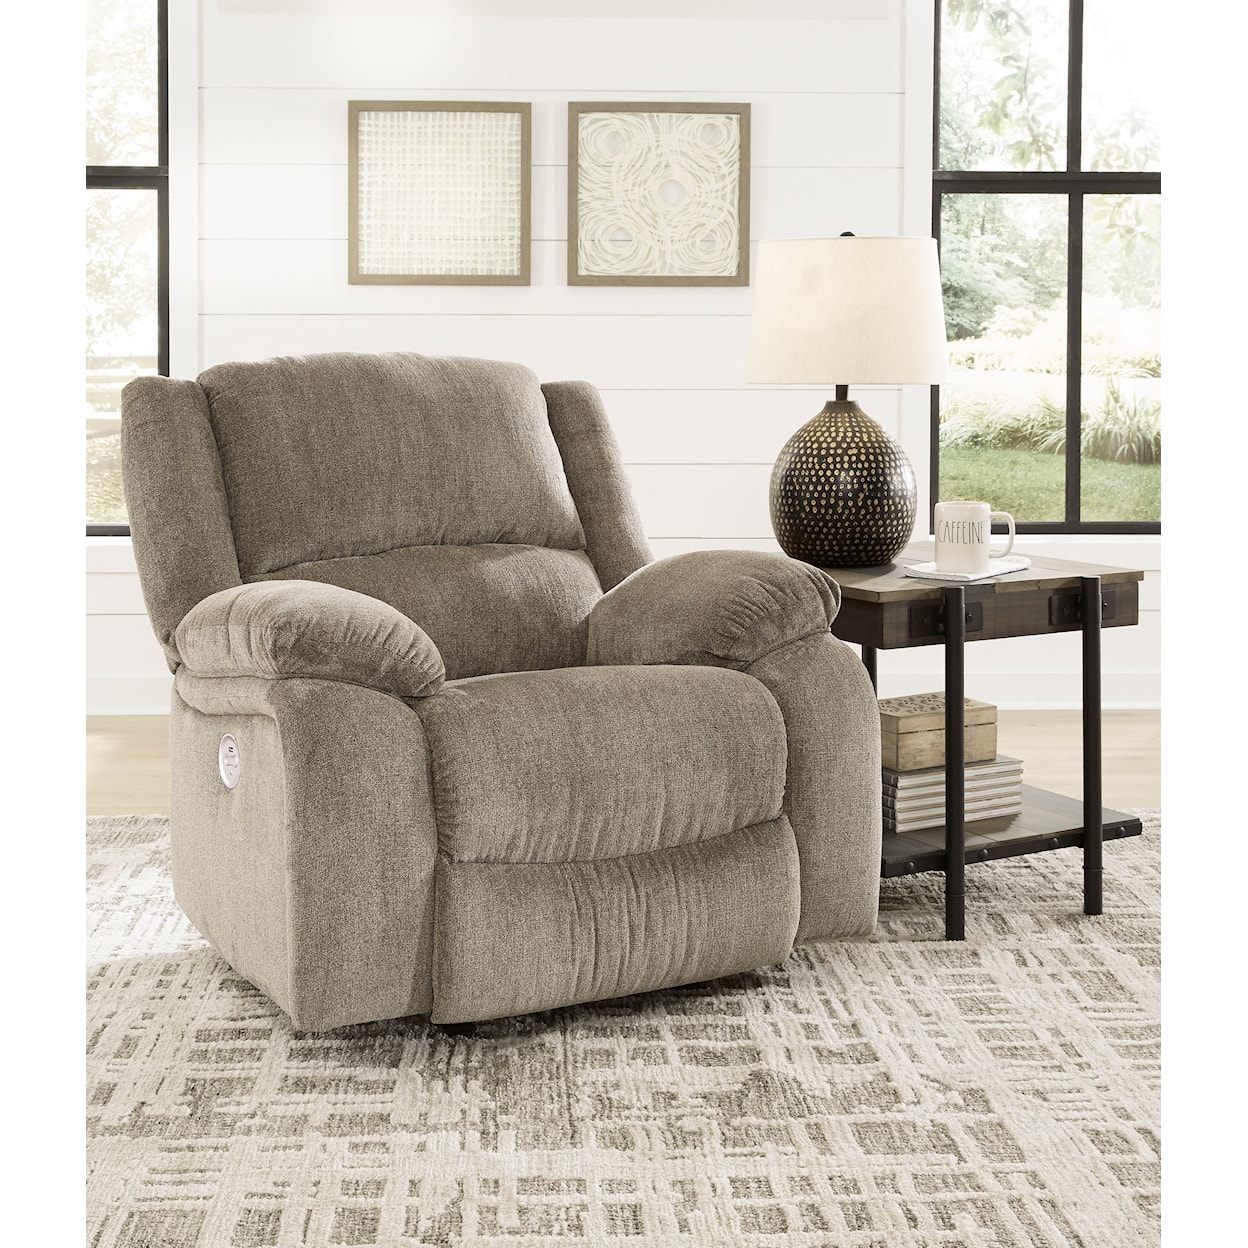 Signature Design by Ashley Draycoll Power Rocker Recliner